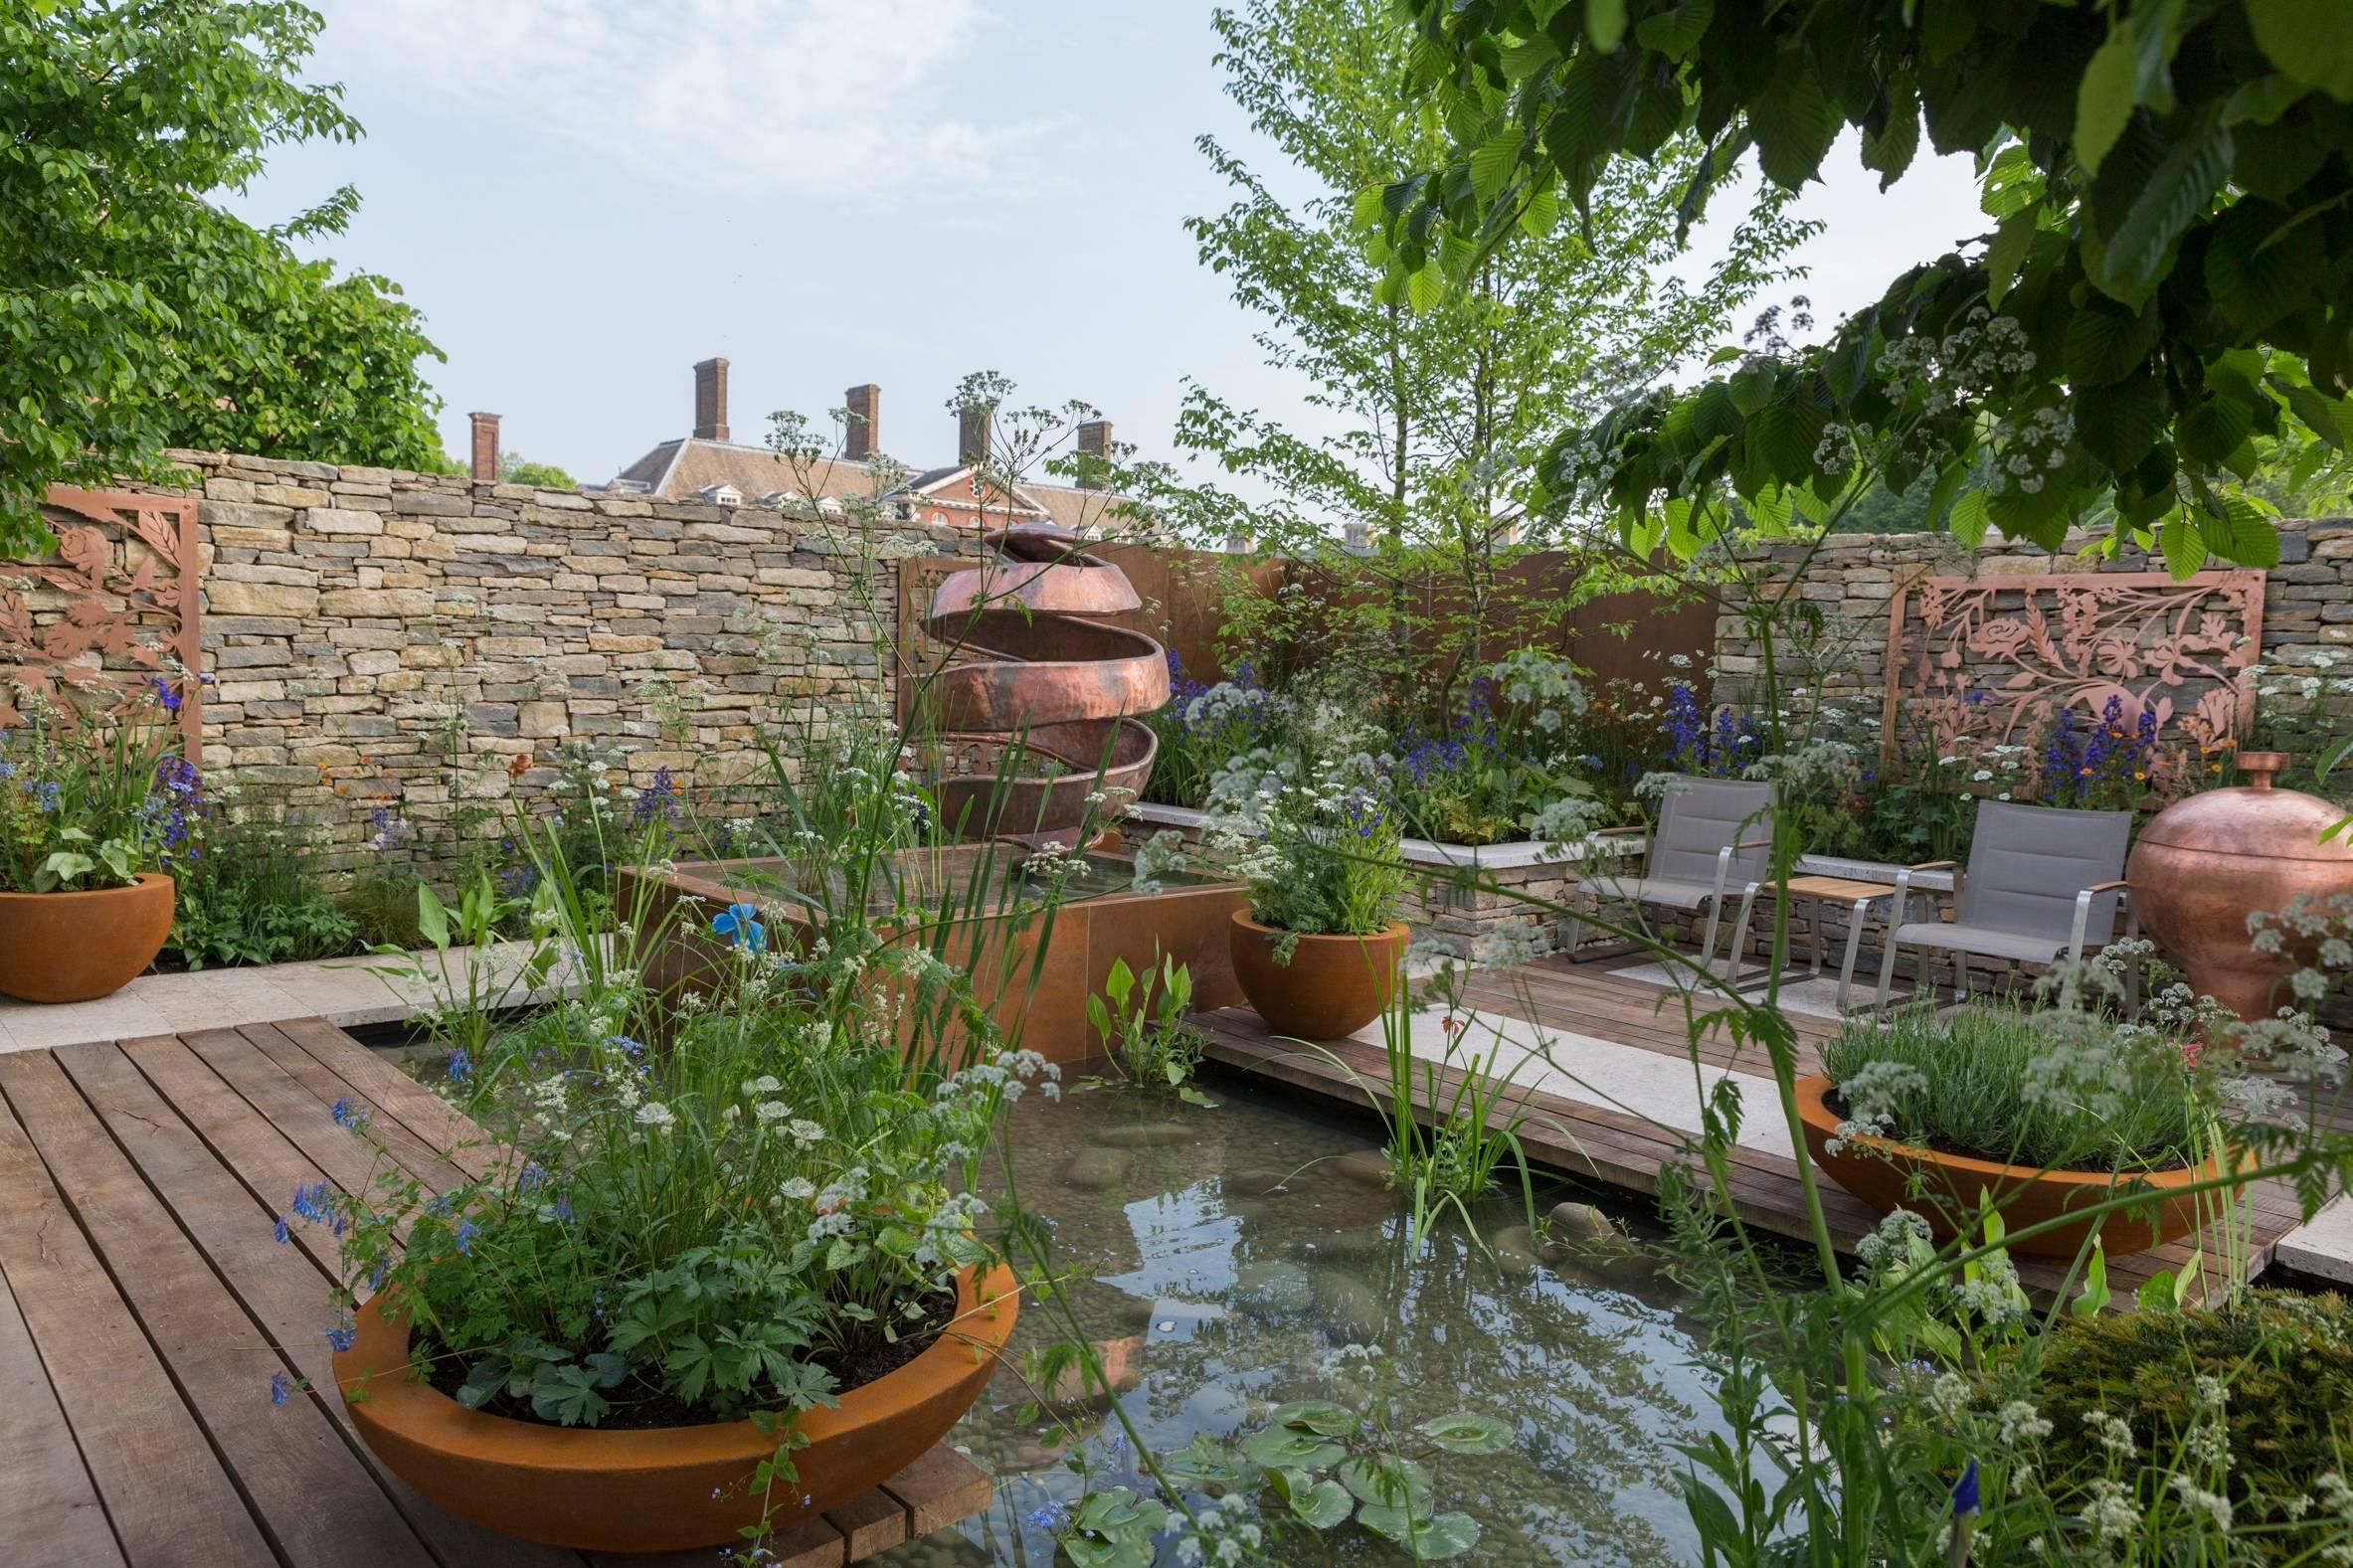 chelsea flower show - latest news, breaking stories and comment